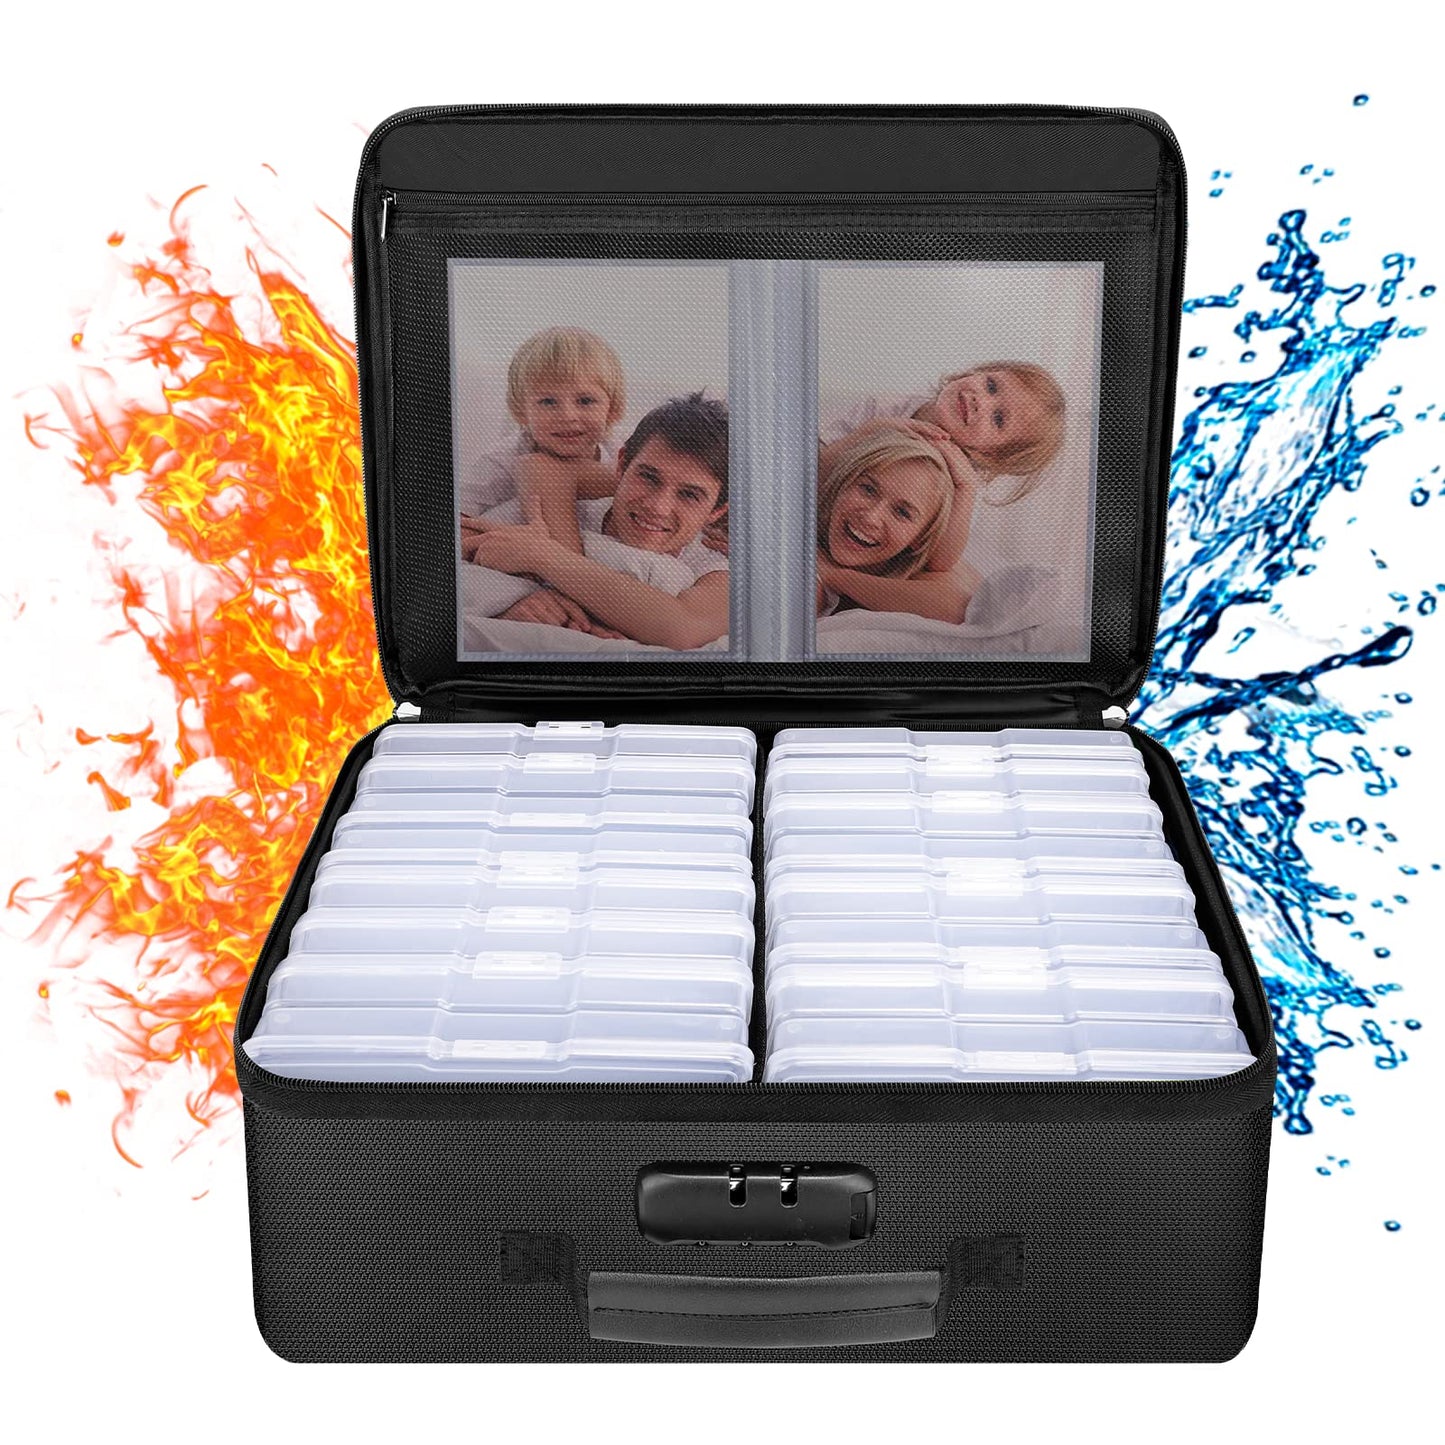 ENGPOW Fire Resistant Photo Storage Box with 16 Interior 4" x 6" Photo Boxes (Multi-Color), Lockable Photo Storage Box, Foldable Portable Photo Storage Container with Handles to Hold Photos , pictures, photography rafts